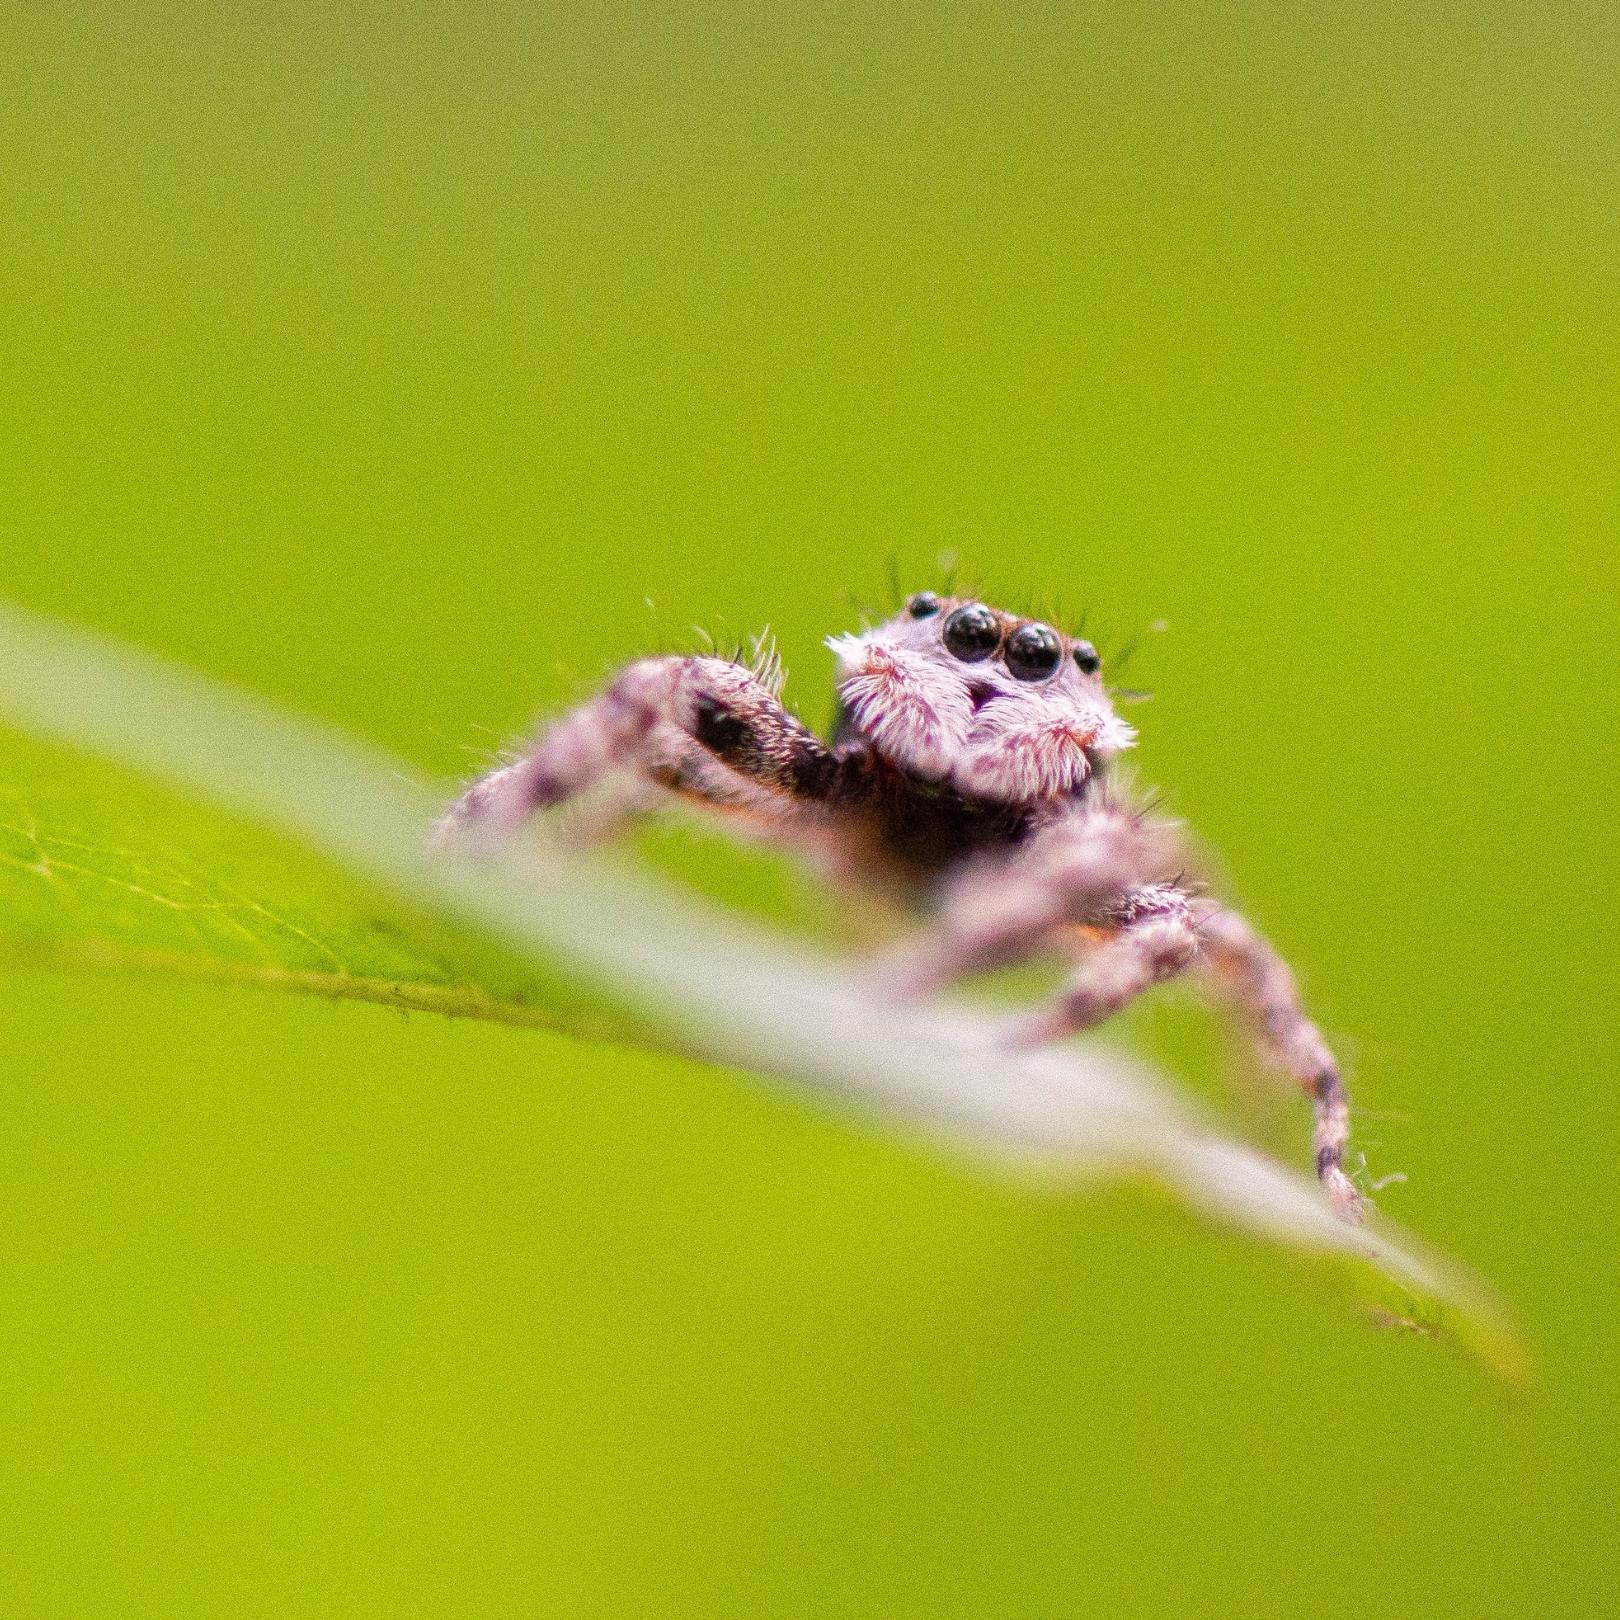 Jumping spider on a leaf with a green background